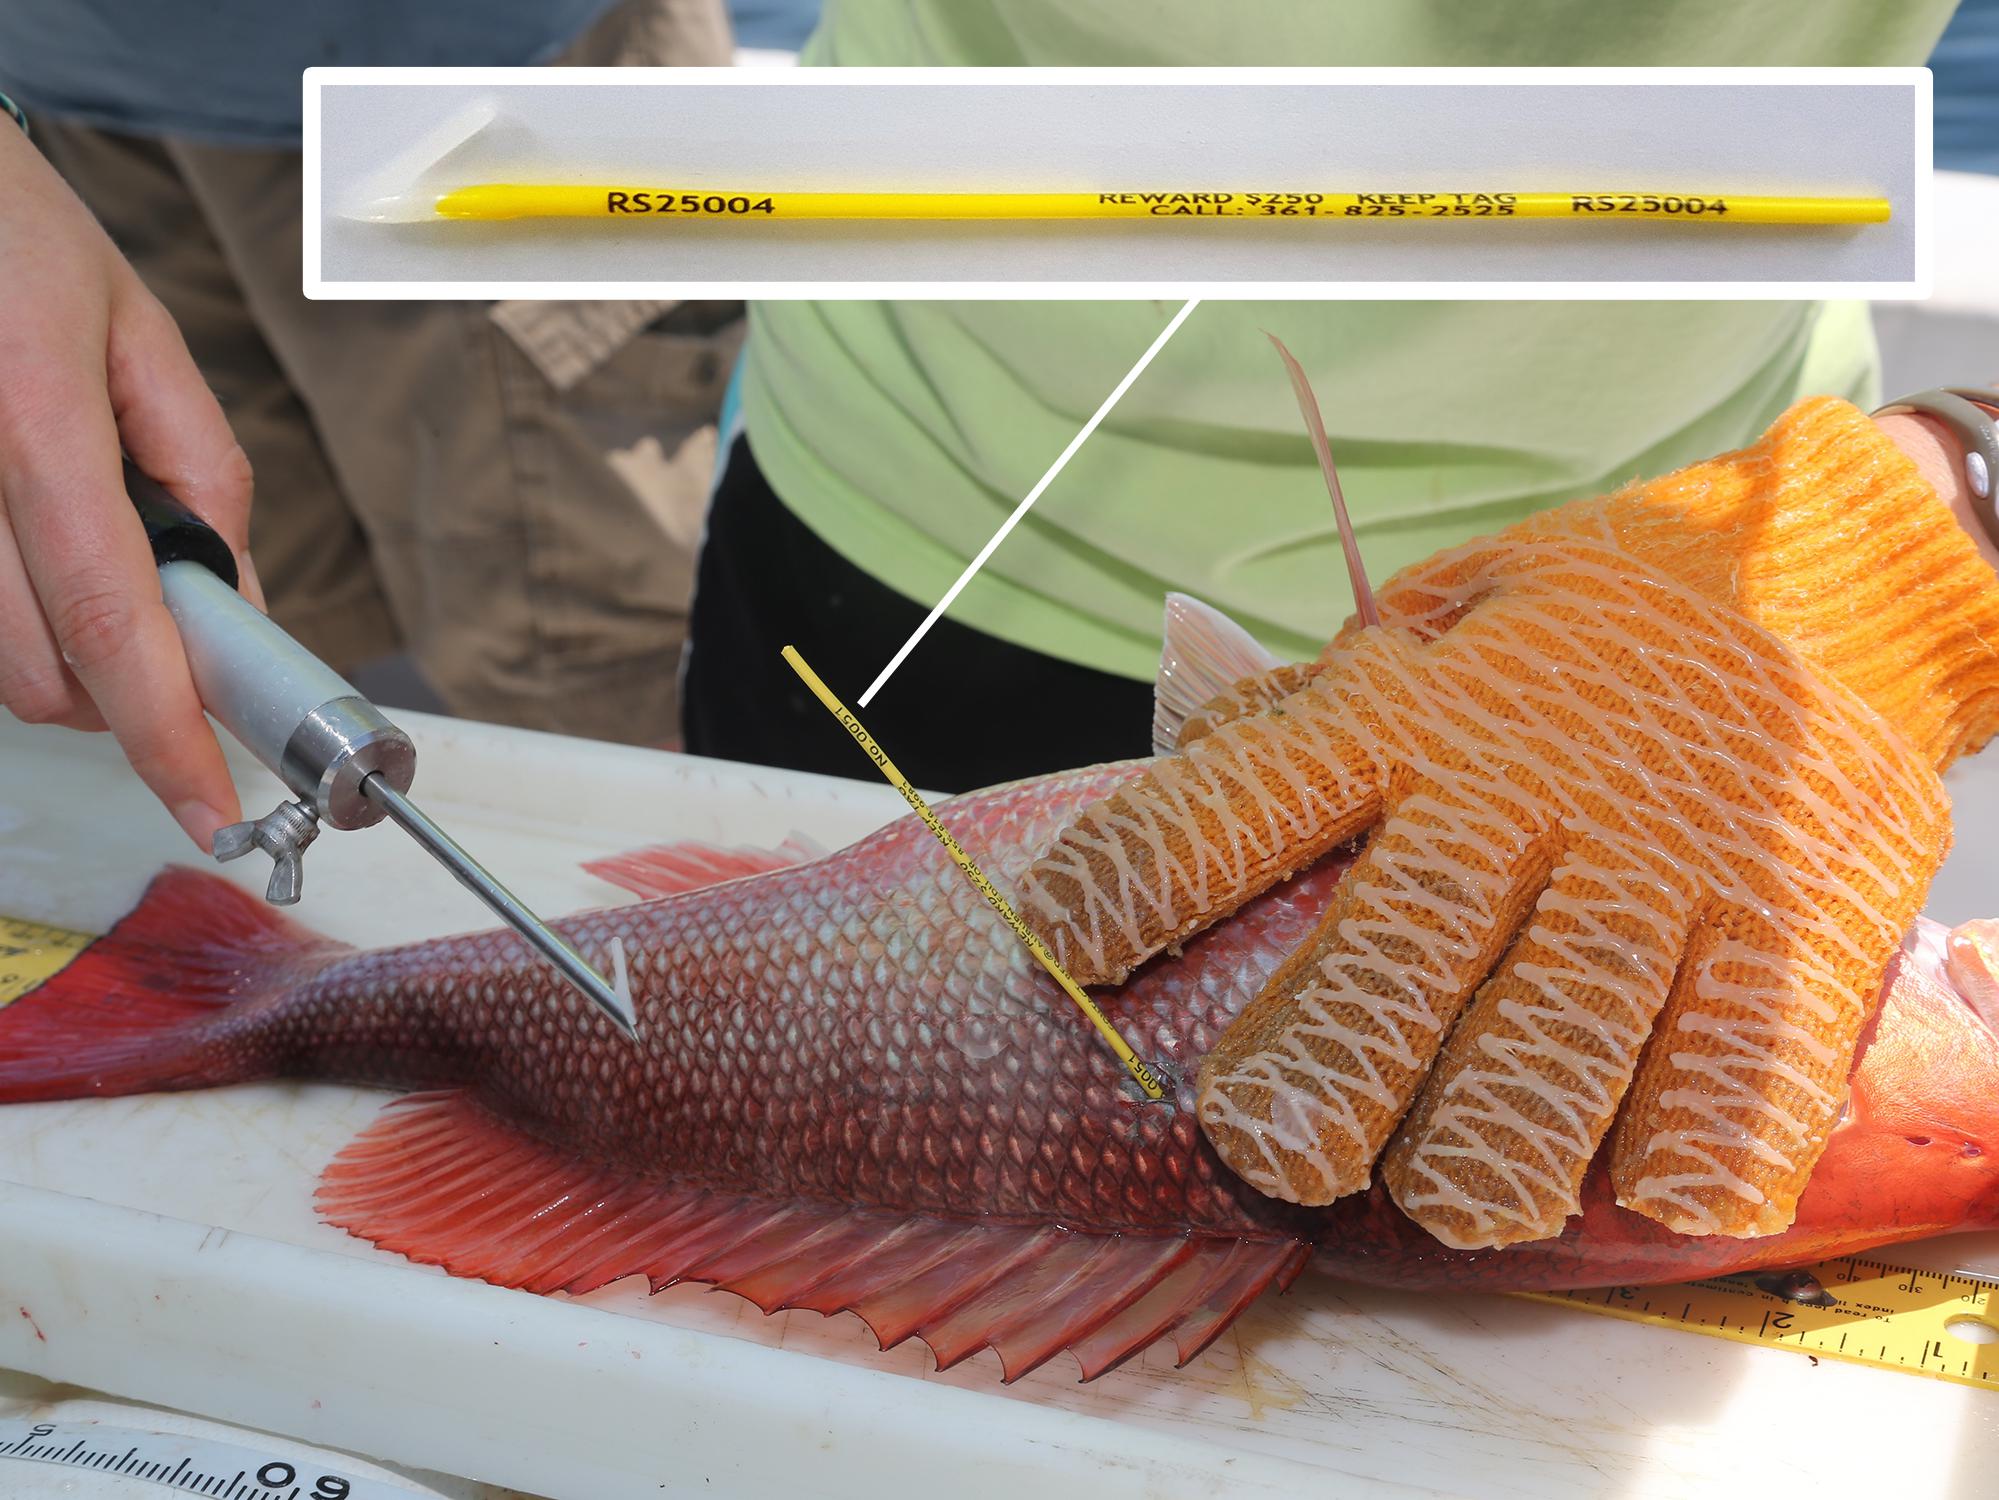 One gloved hand holds a reddish fish on a table while an ungloved hand holds a small tool just used to insert a dart slightly below the top fin. A small photo inserted over part of the main photo shows a close-up view of a small, spear-like rod with a white point on one end and black writing on the yellow portion.